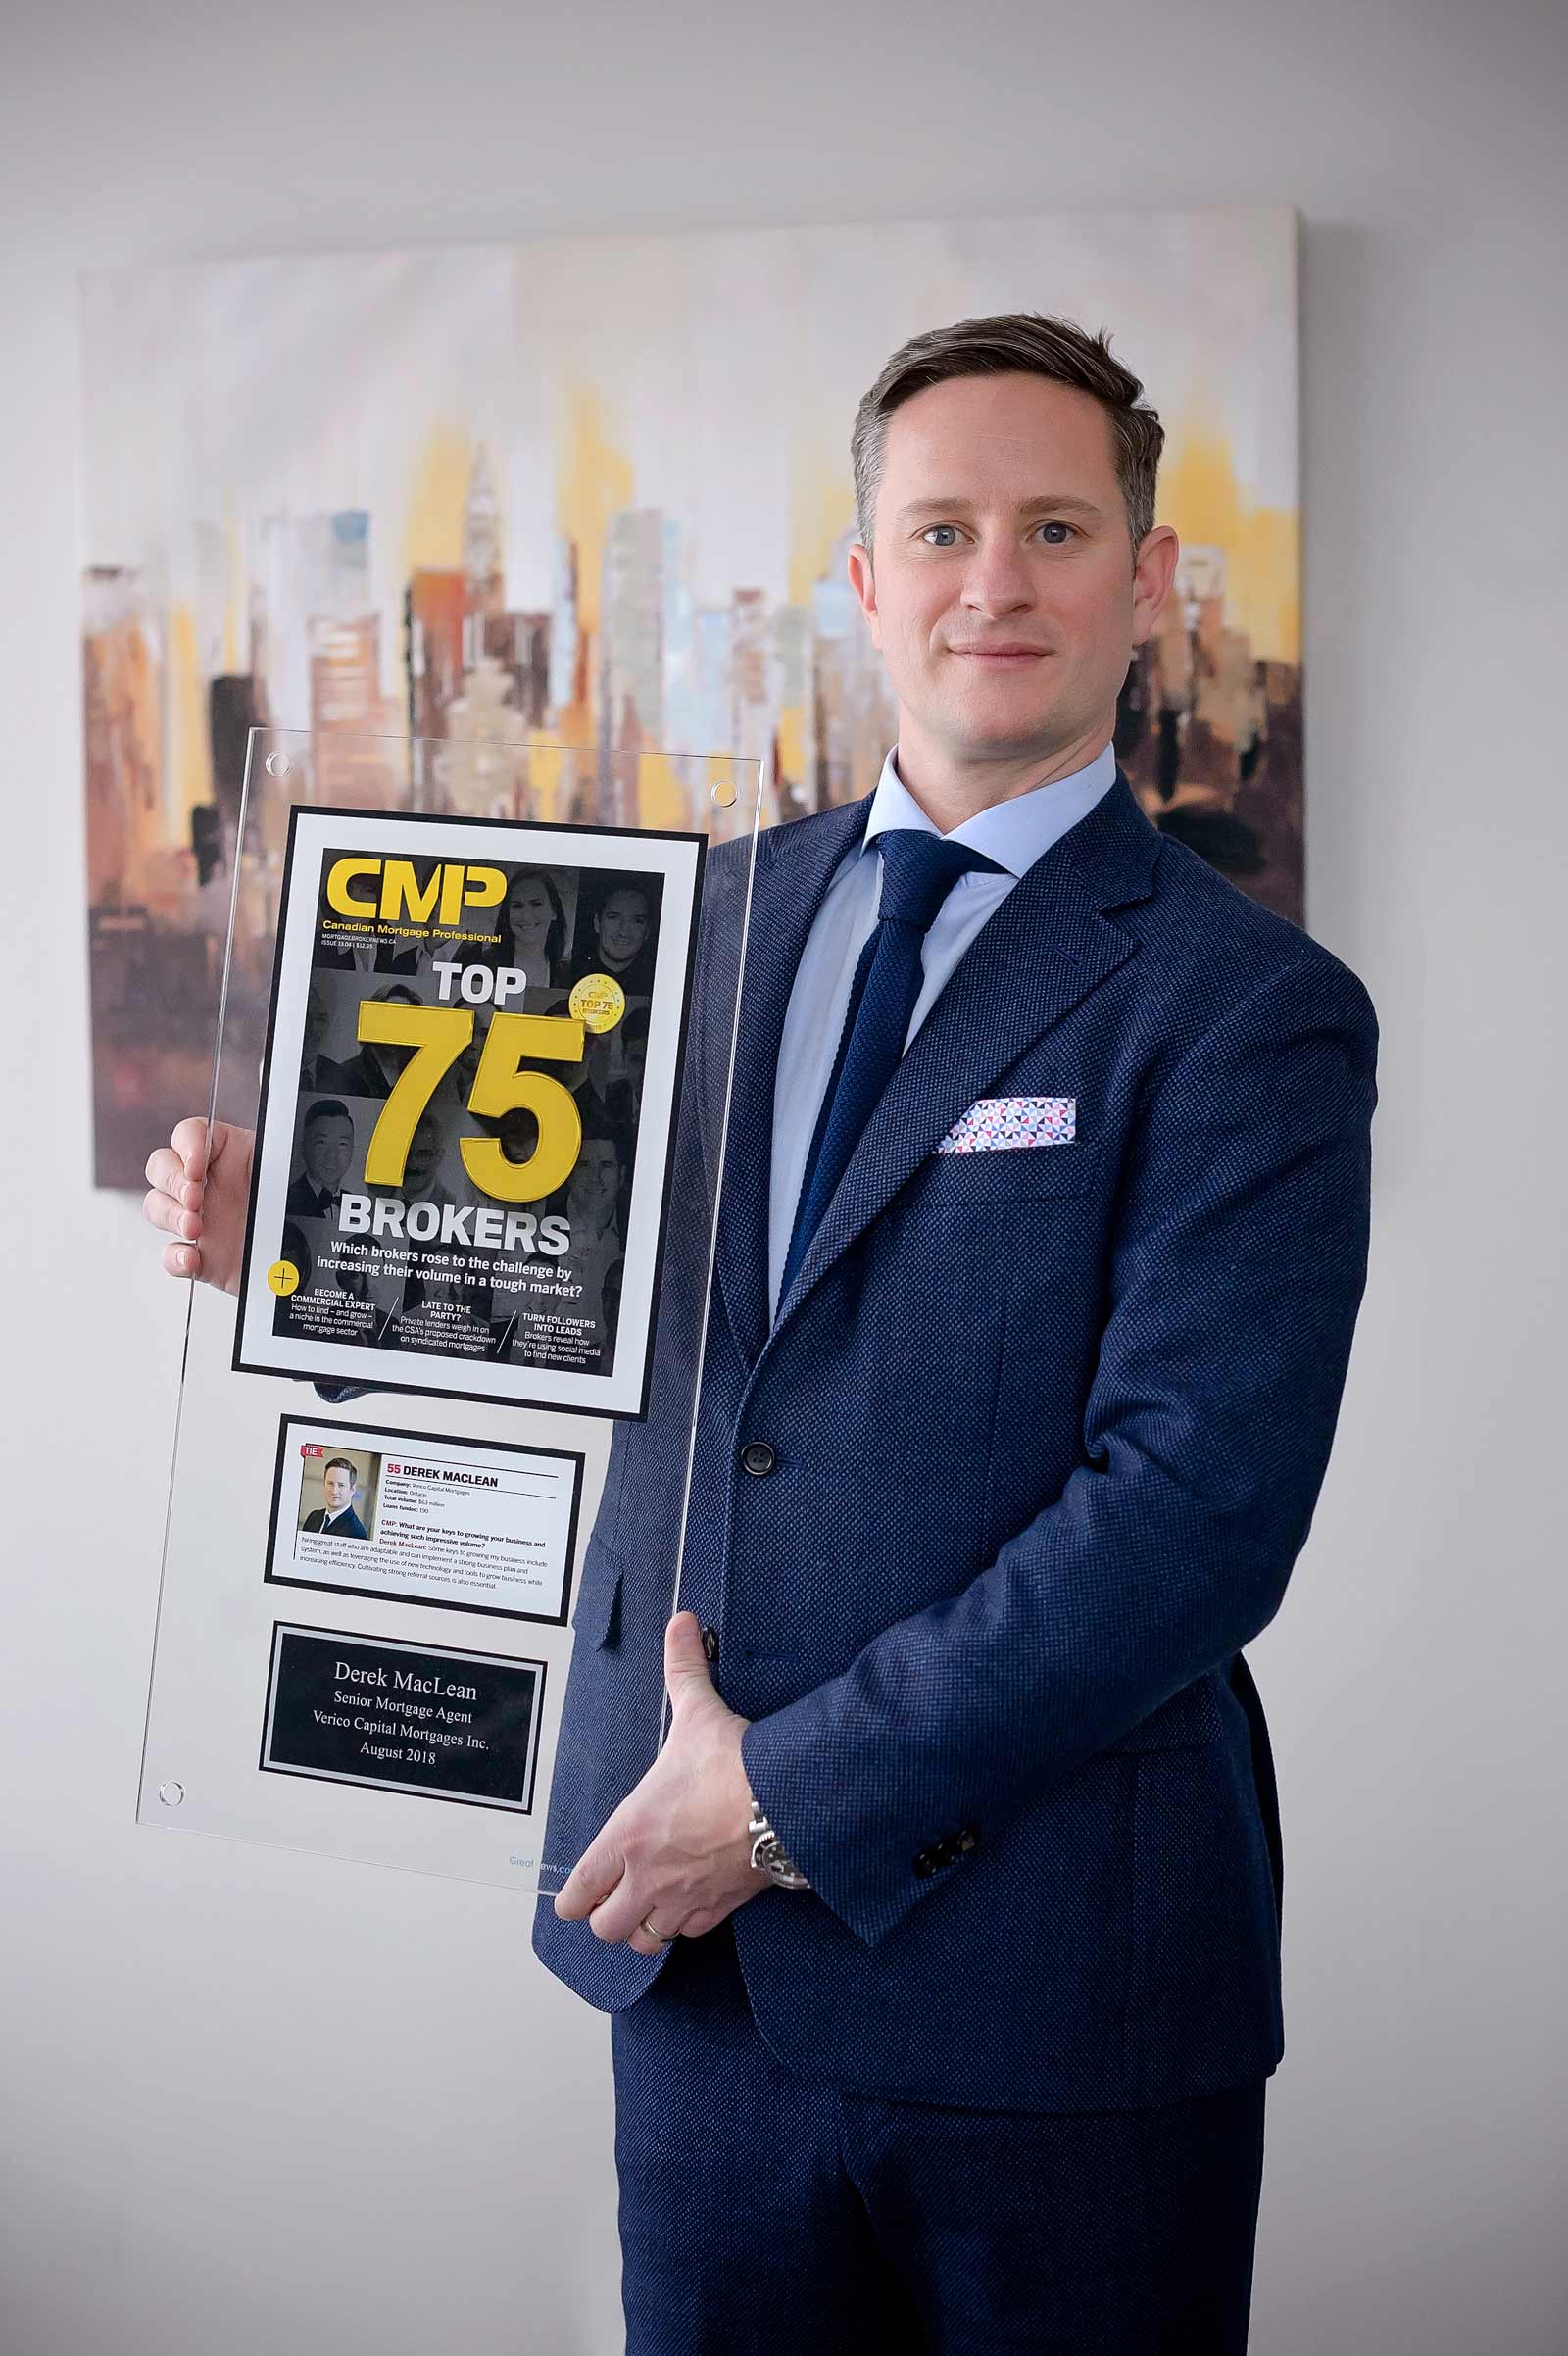 Derek MacLean with the MacLean Team at Capital Mortgages with his accolade of top 75 mortgage brokers in Canada